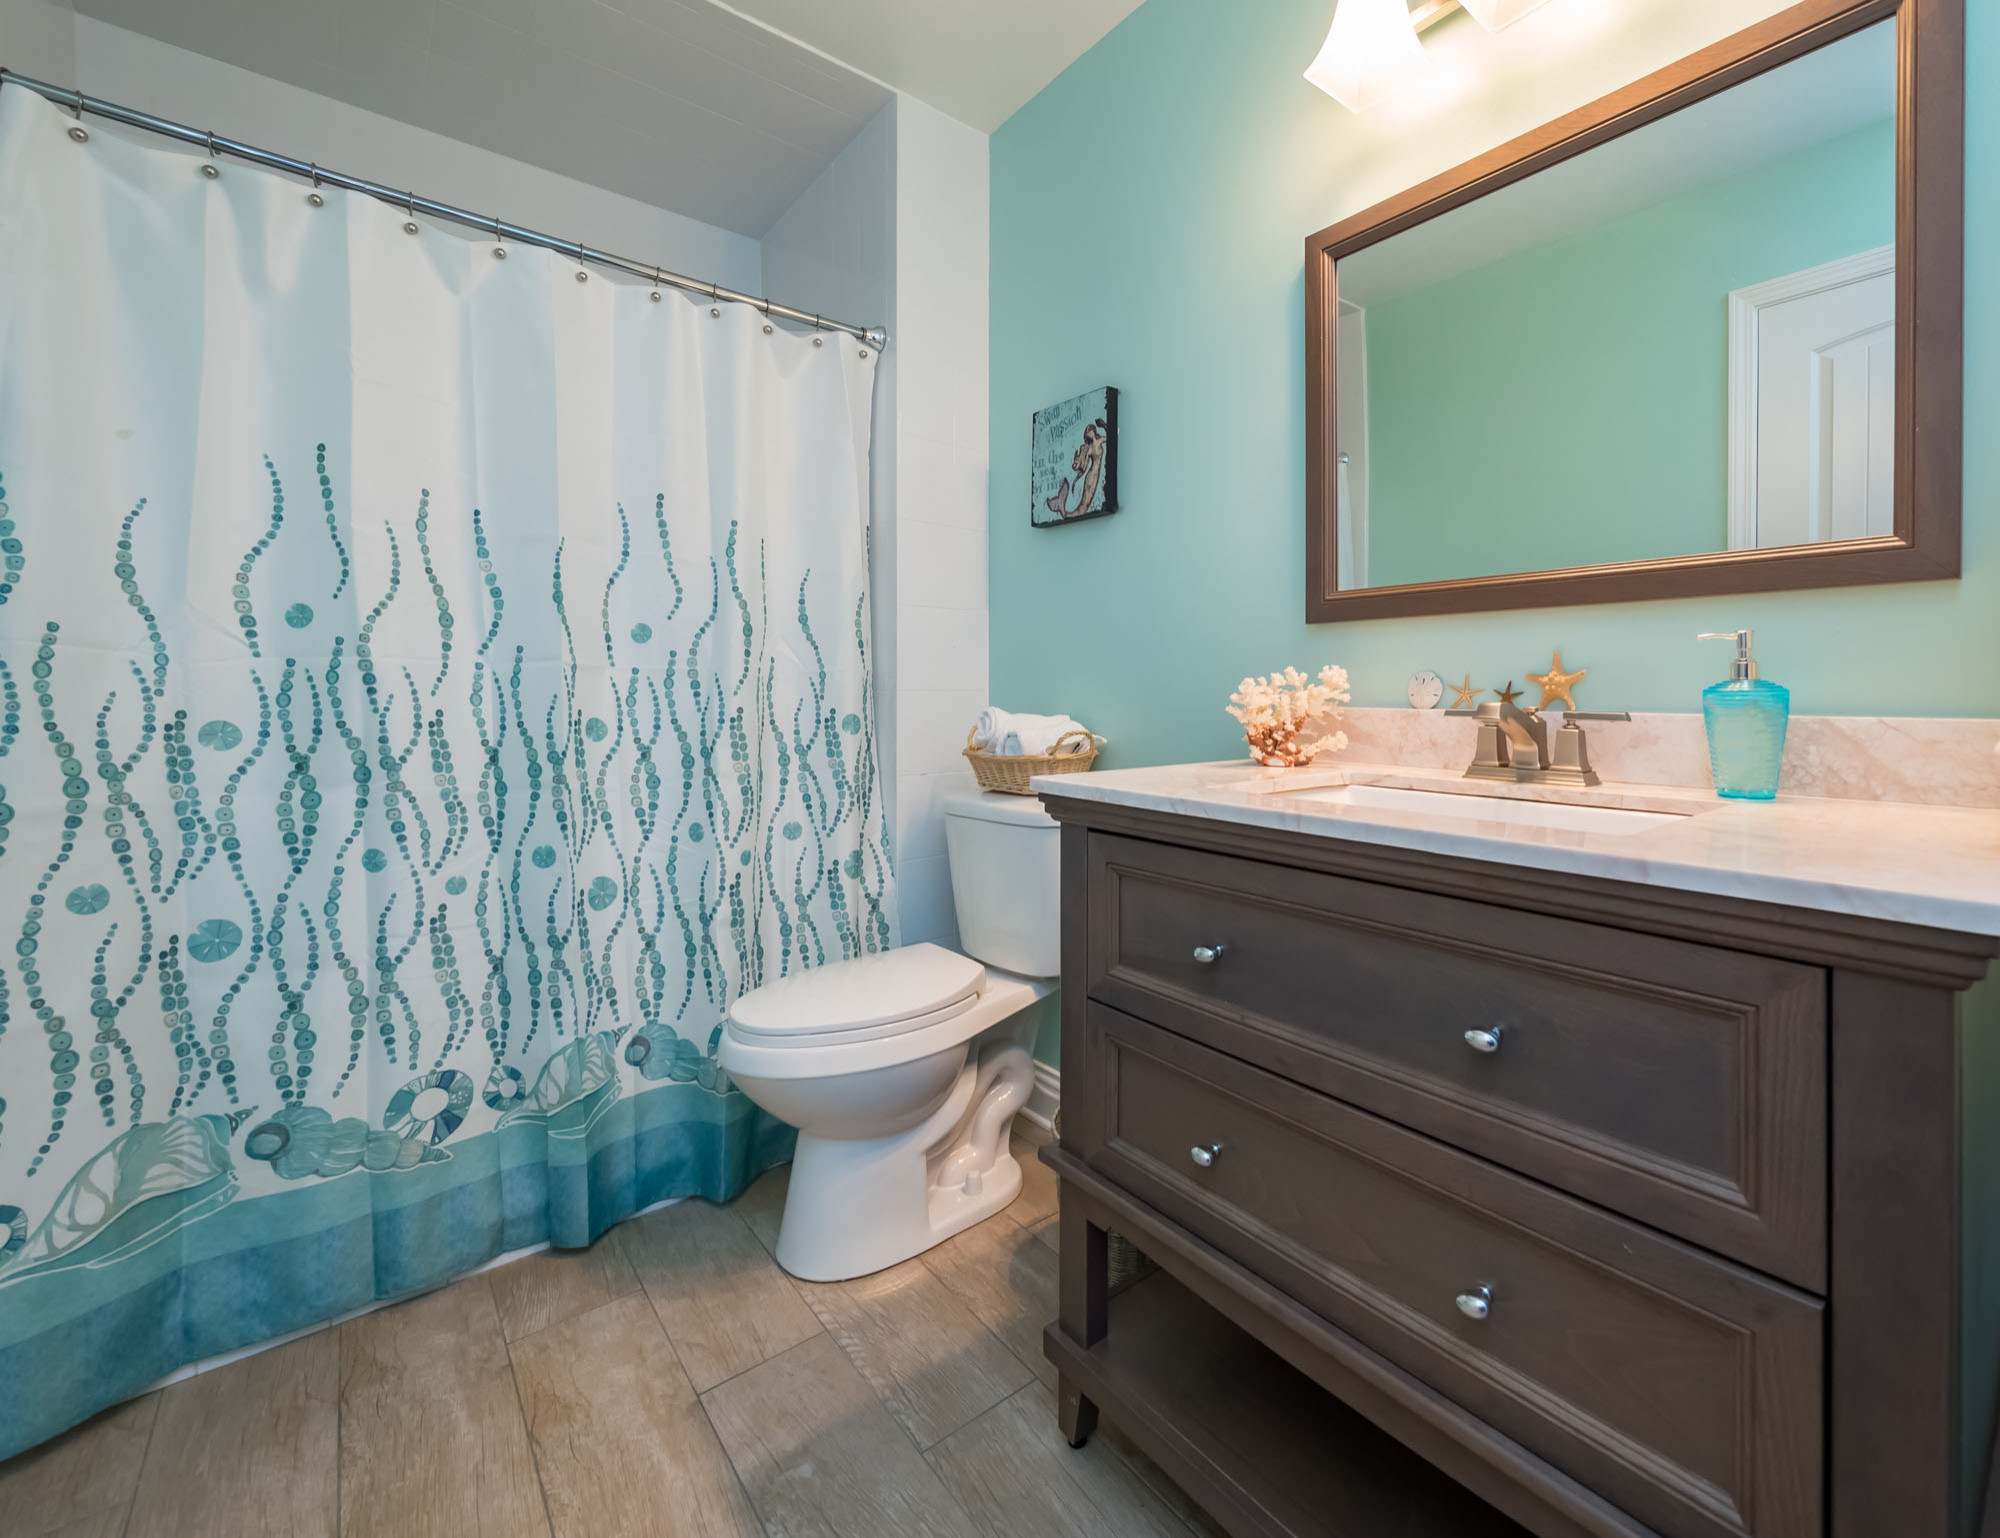 75 Beautiful Bathroom With Gray Cabinets And Green Walls Pictures Ideas September 2020 Houzz